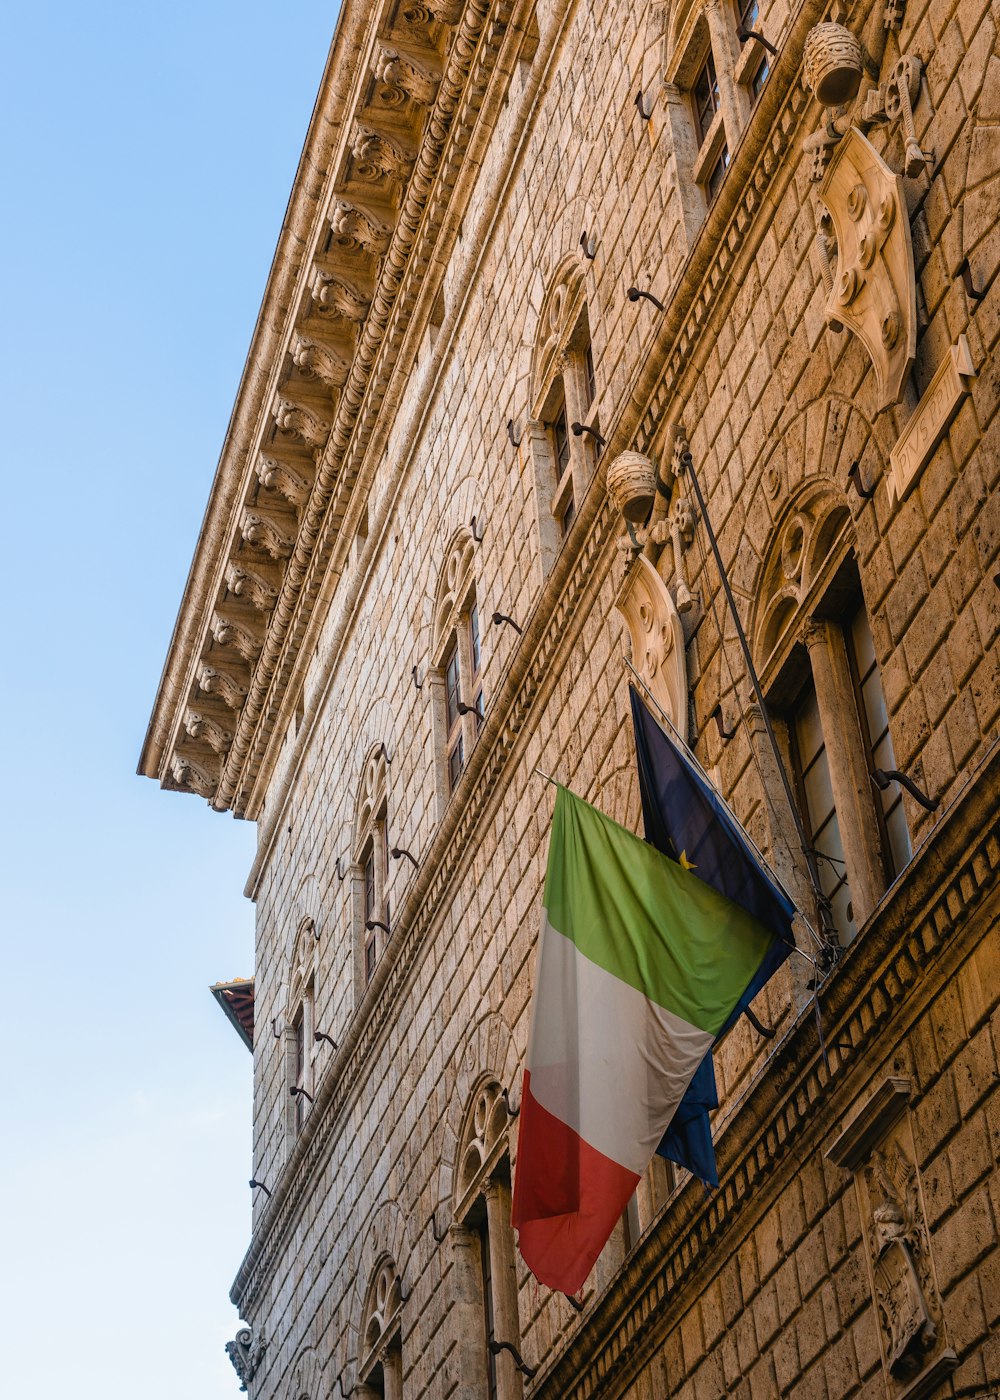 30,000+ Italian Flag Pictures  Download Free Images on Unsplash